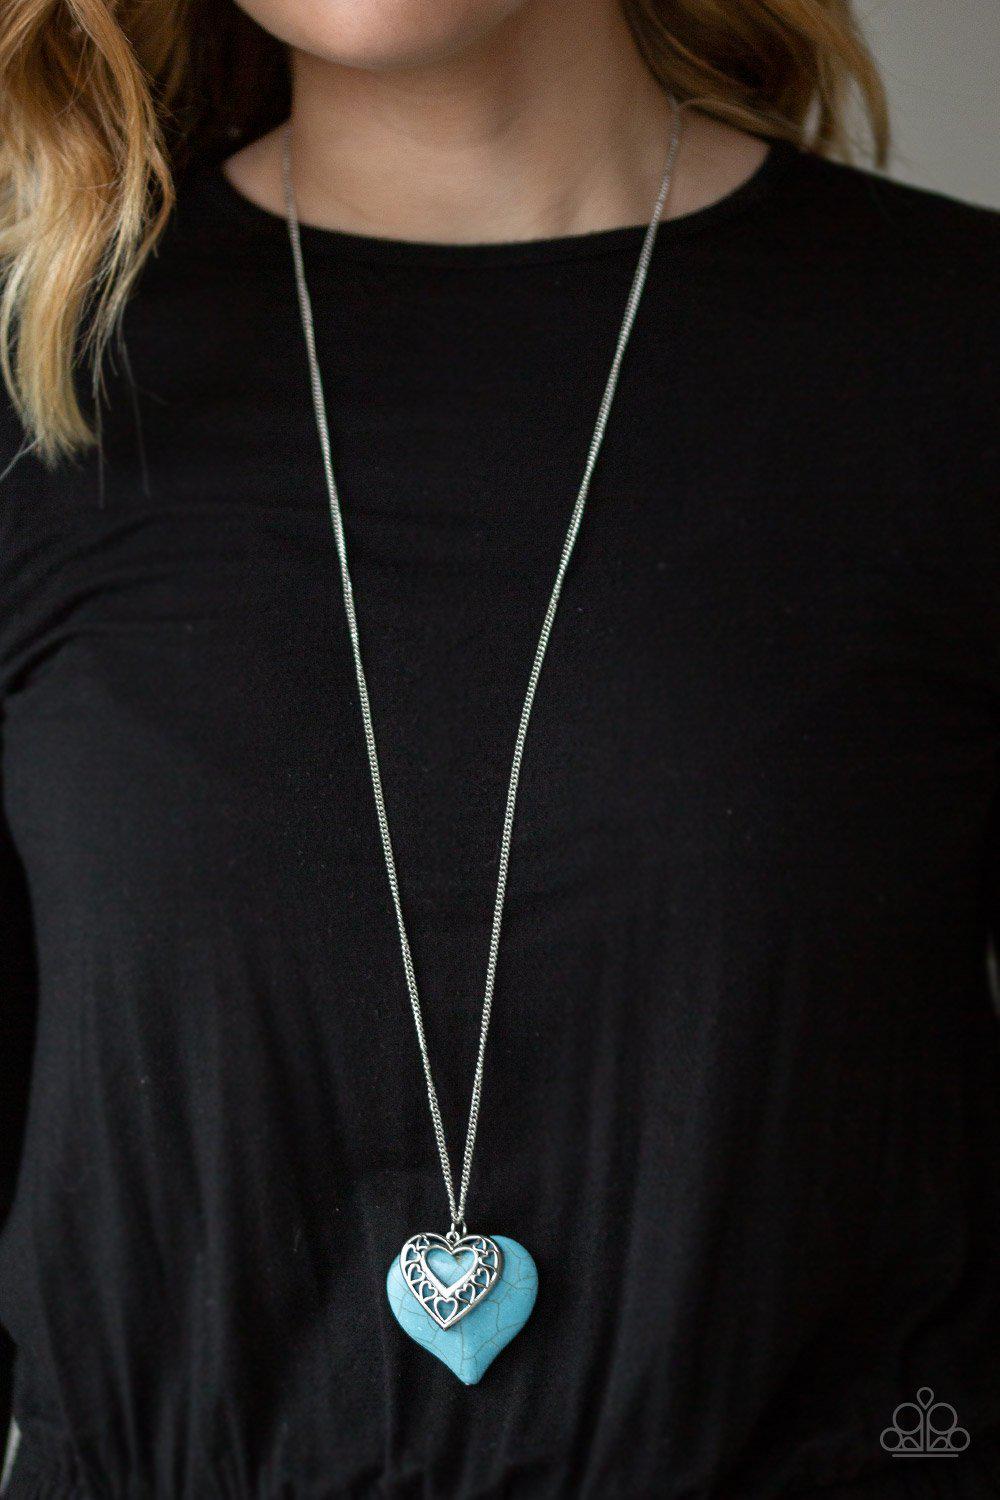 Southern Heart Turquoise Blue Stone Necklace and matching Earrings - Paparazzi Accessories-CarasShop.com - $5 Jewelry by Cara Jewels